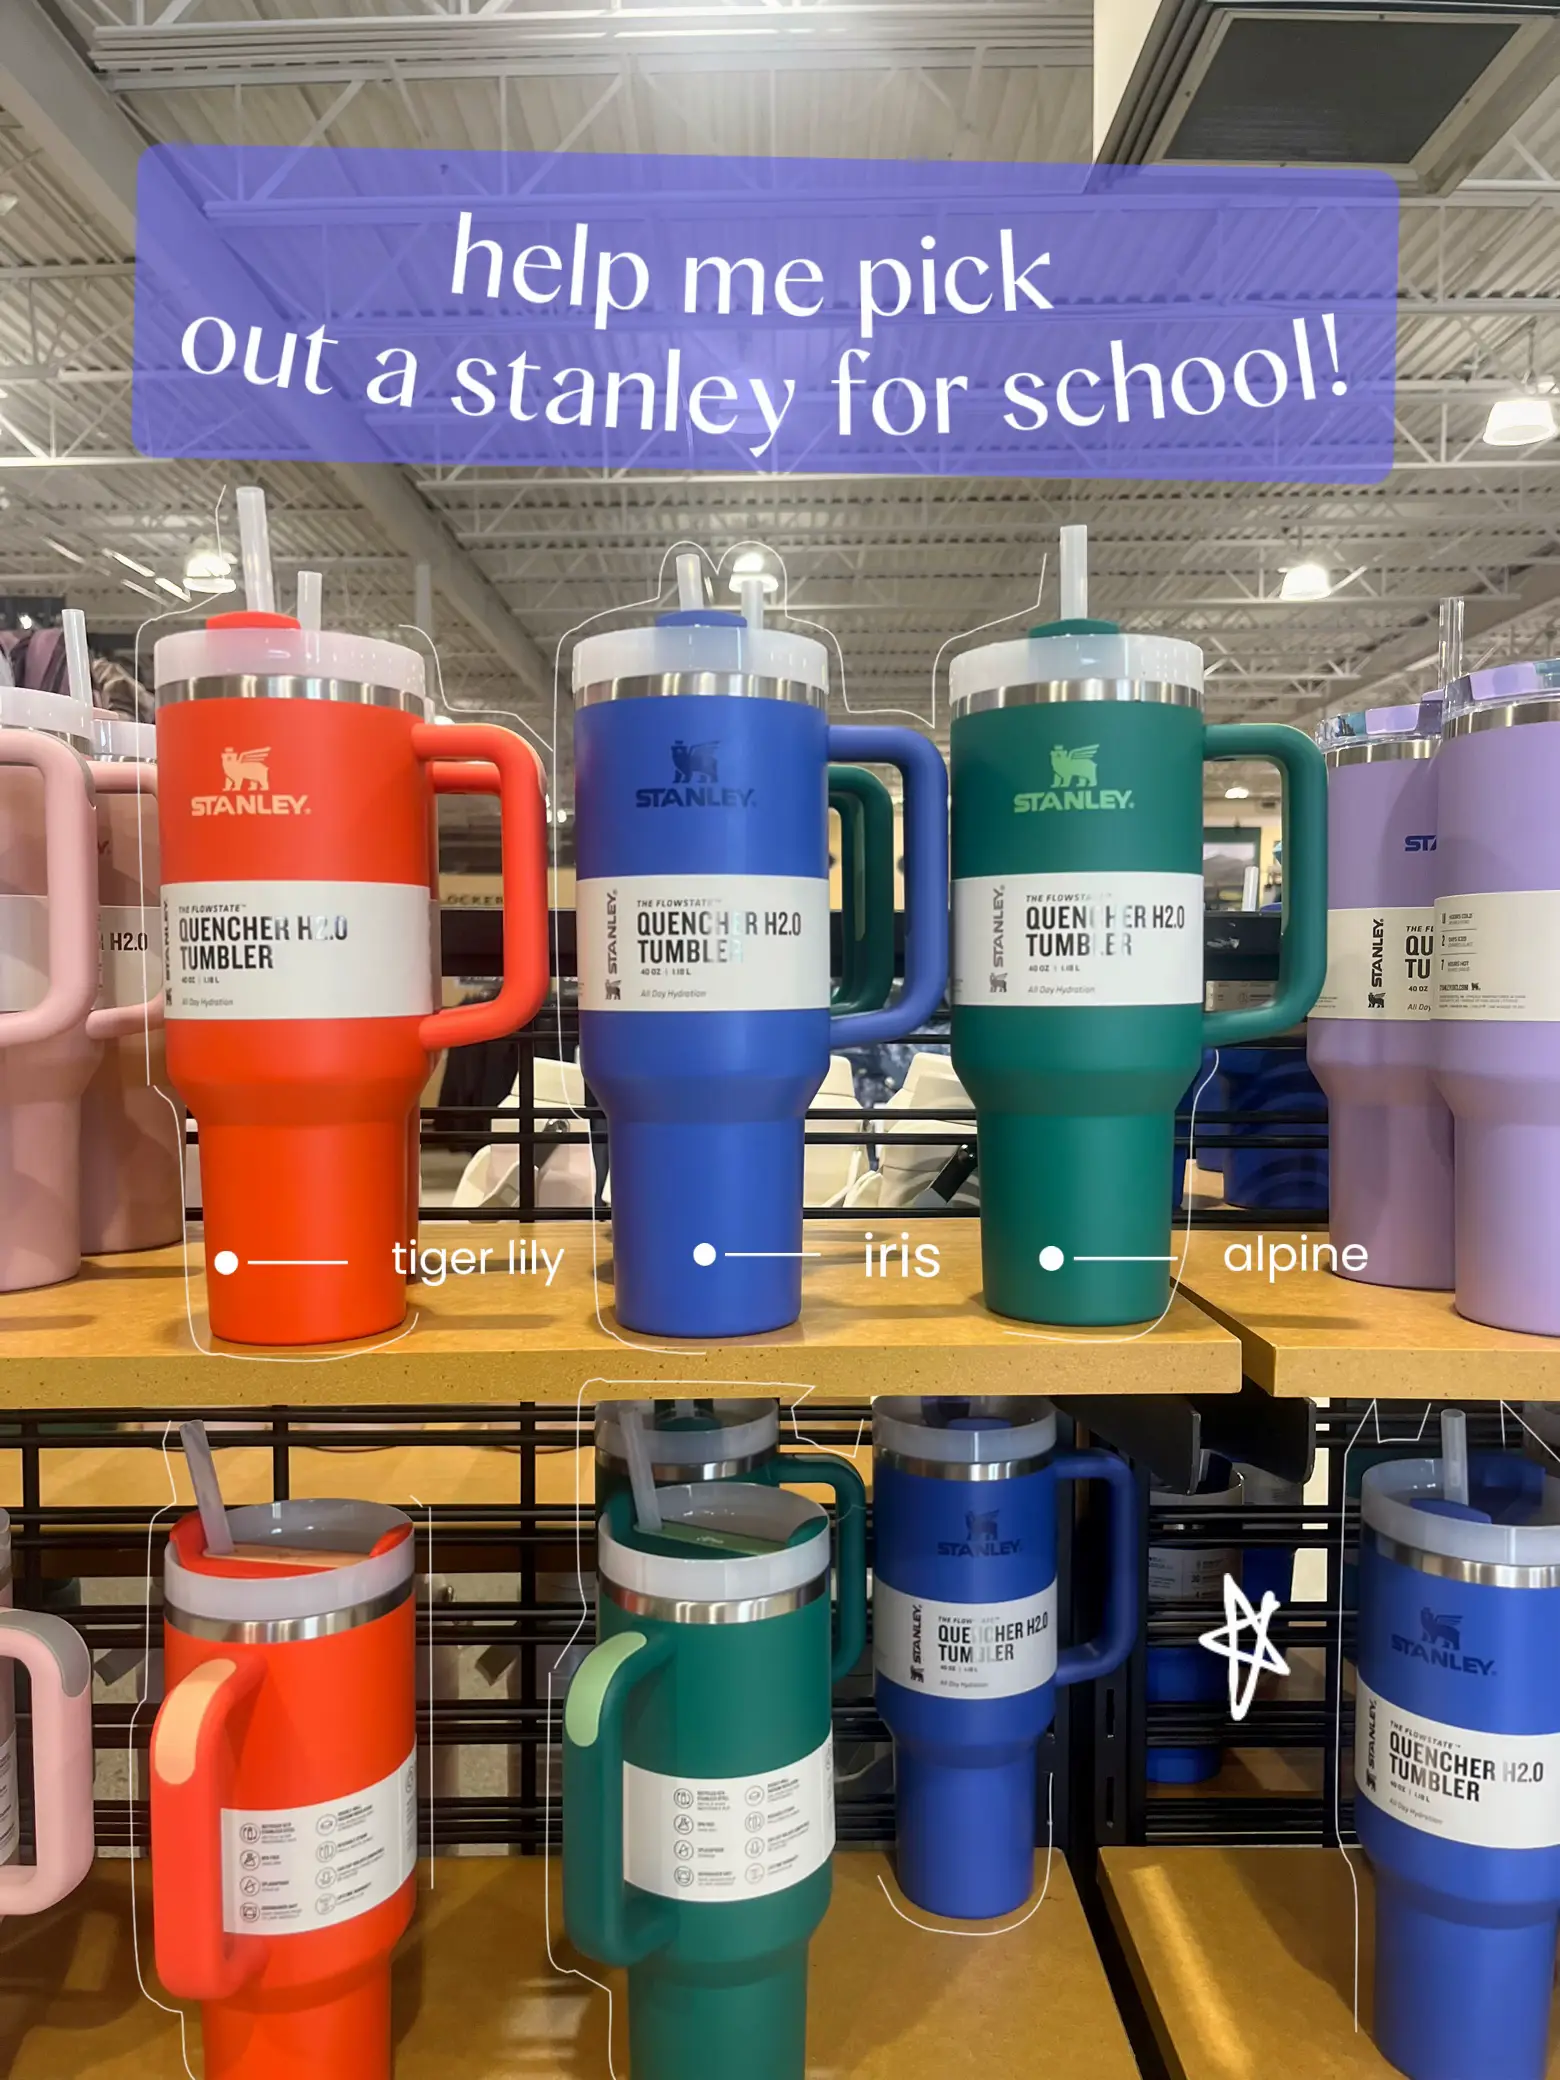 Help me pick a Stanley, Gallery posted by Preppy vibes